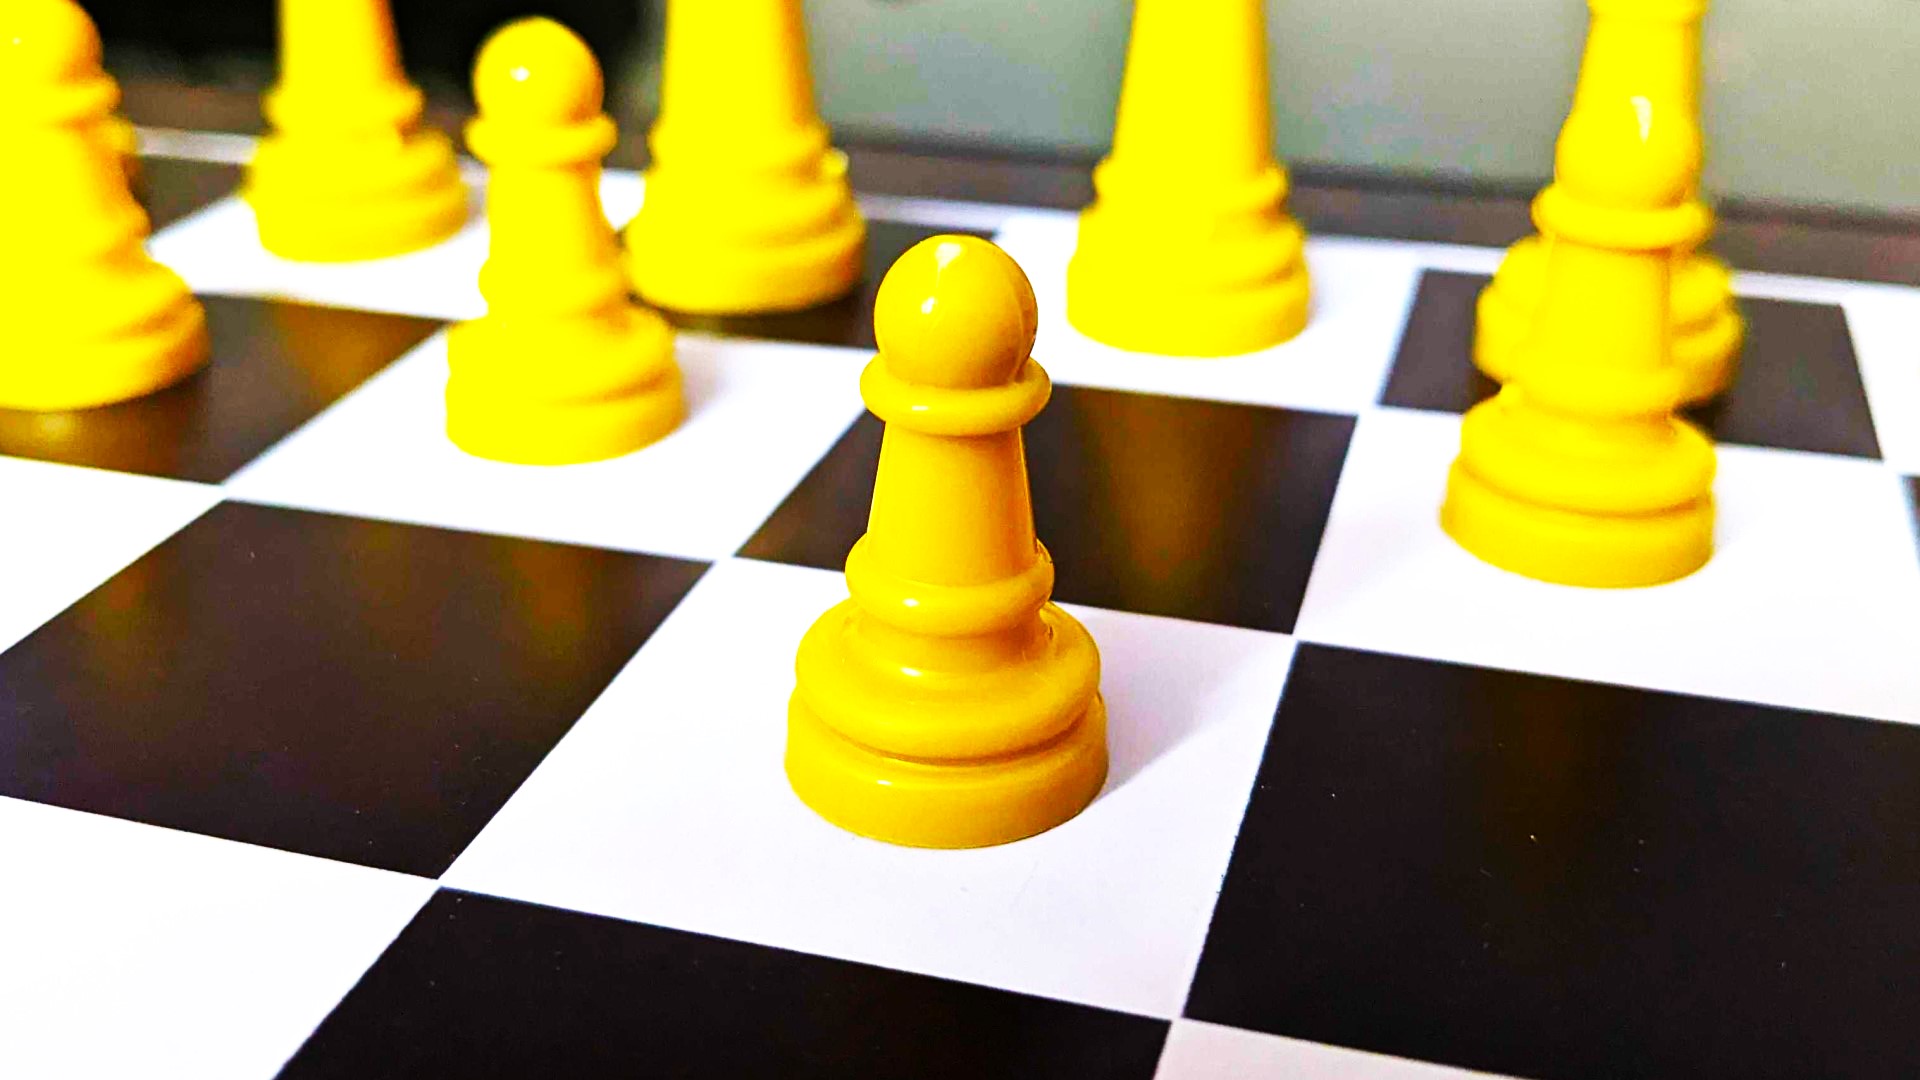 In chess, how do you identify the types of strategy used by your